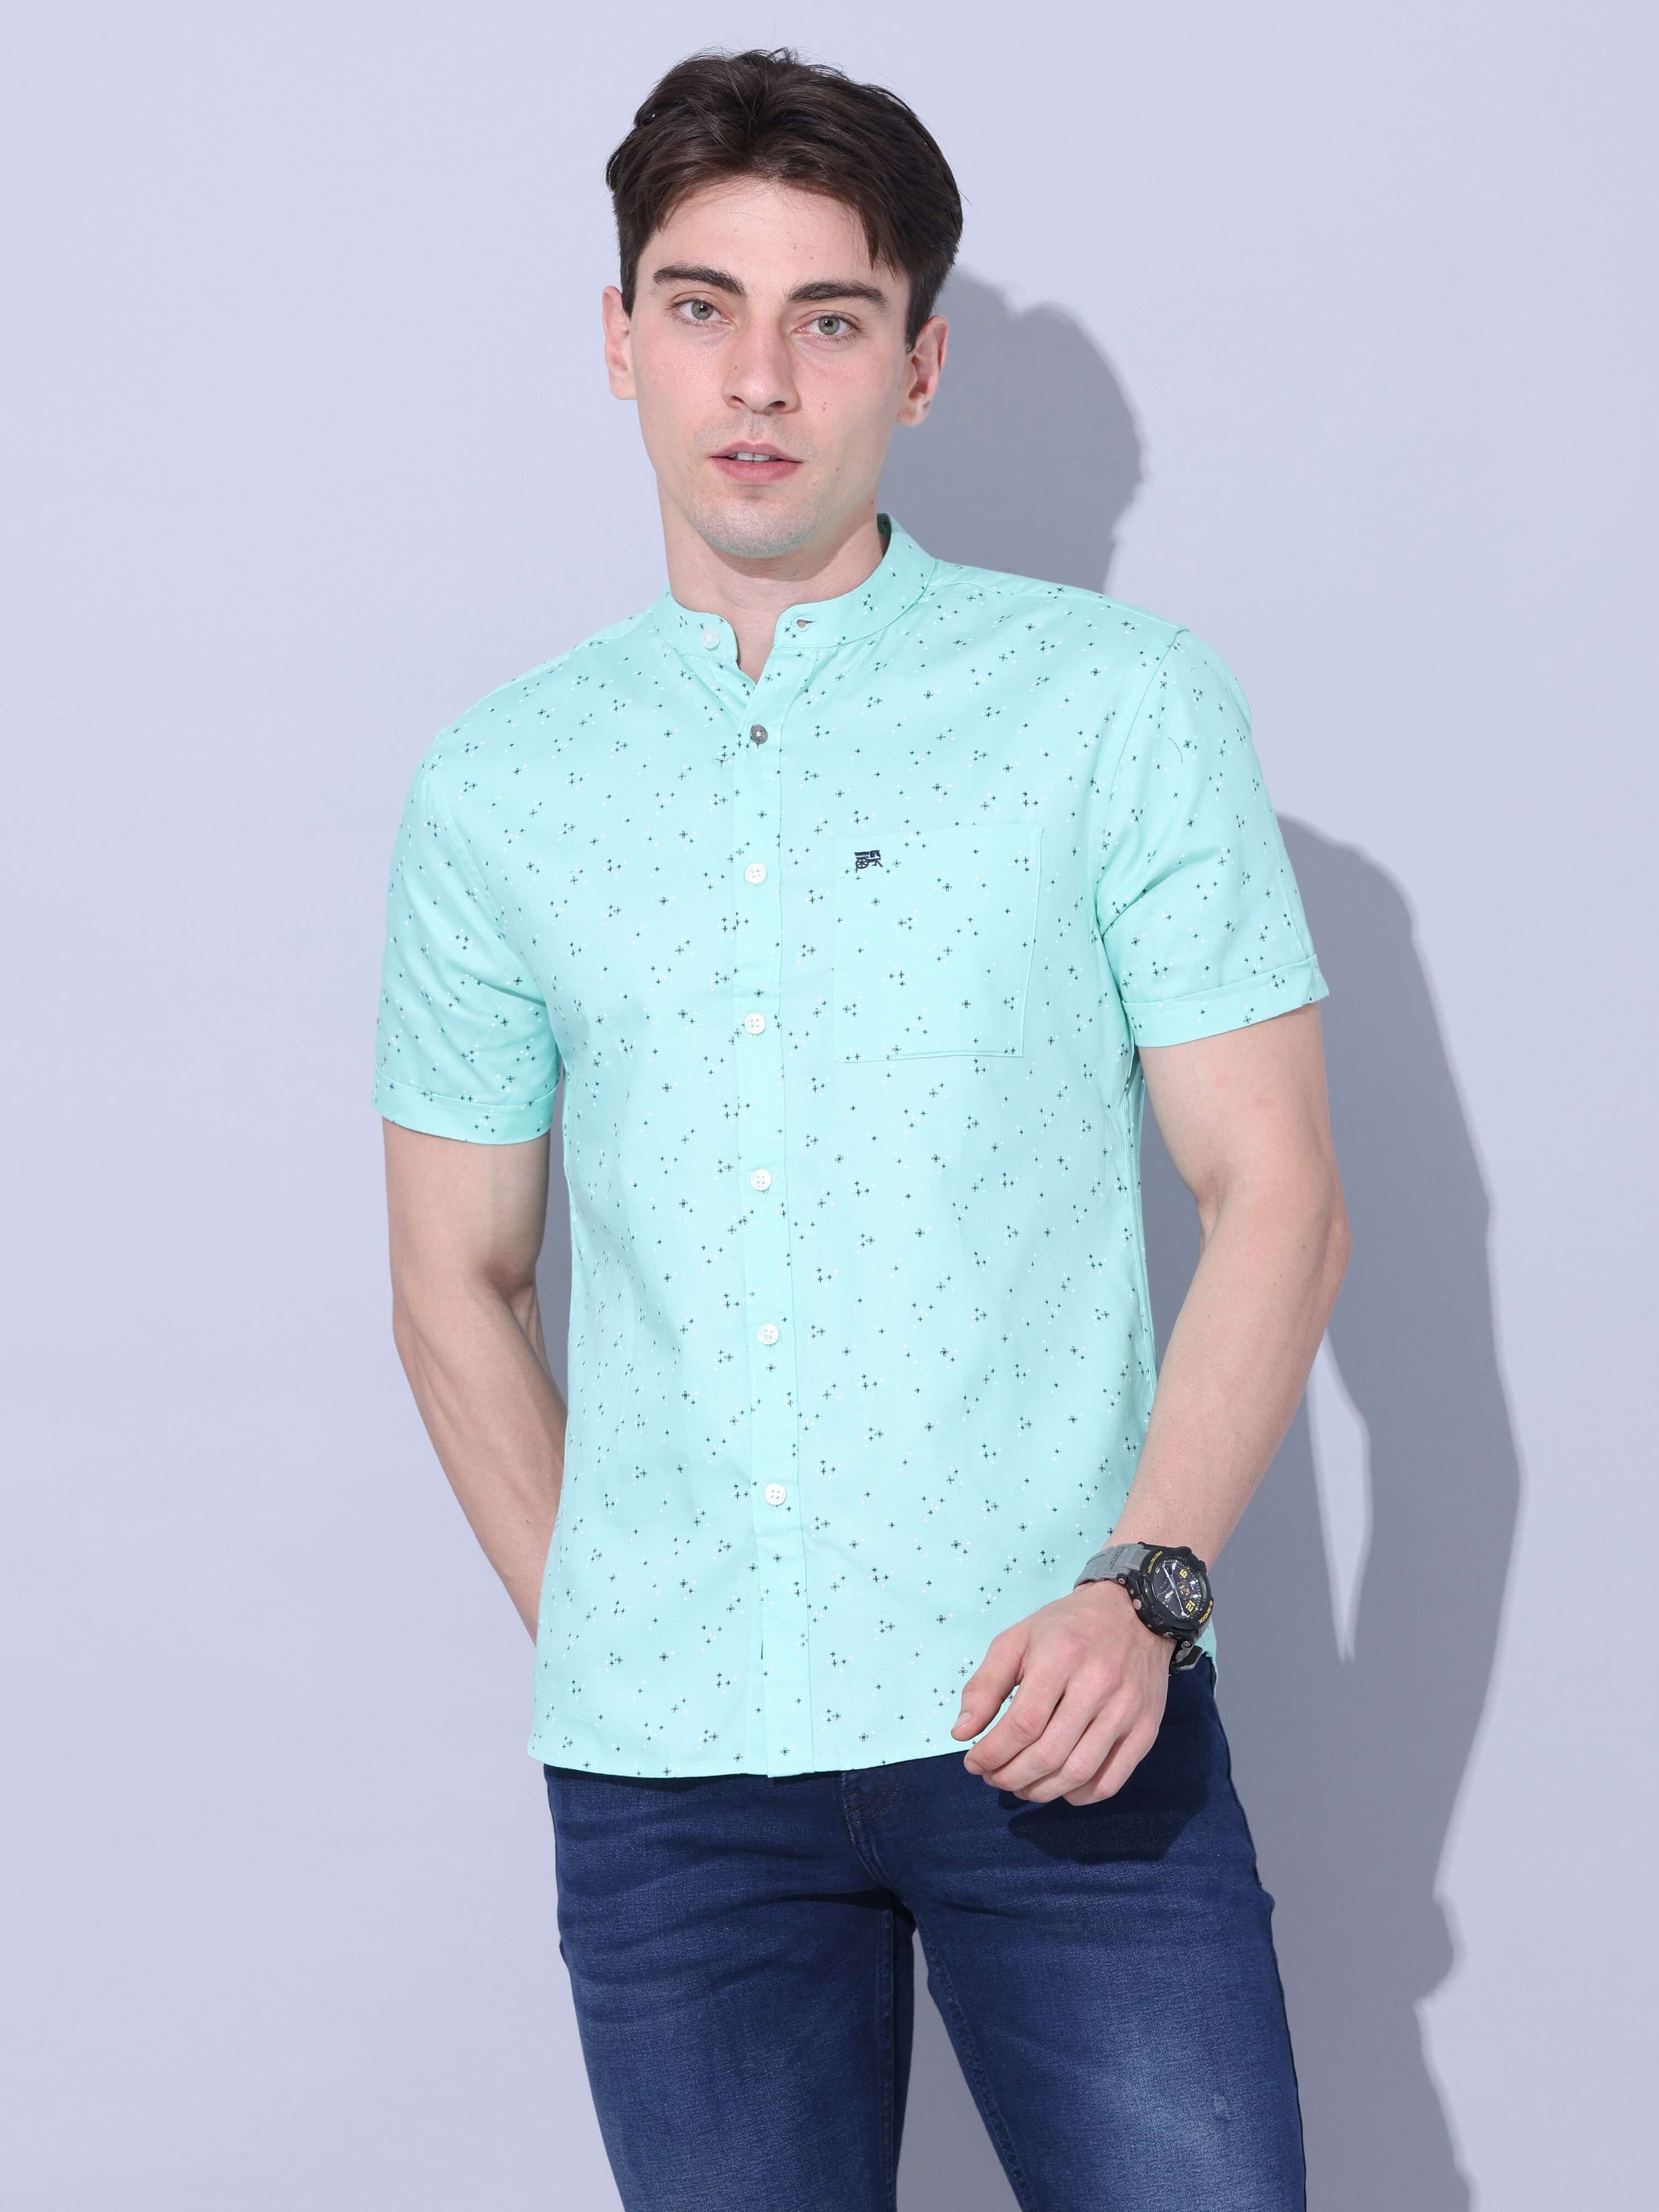 Parrot Green Casual Shirt shop online at Estilocus. • Half-sleeve printed shirt • Cut and sew placket • Regular collar • Single pocket with logo embroidery • Curved hemline • Finest quality sewing • Machine wash care • Suitable to wear with all types of b